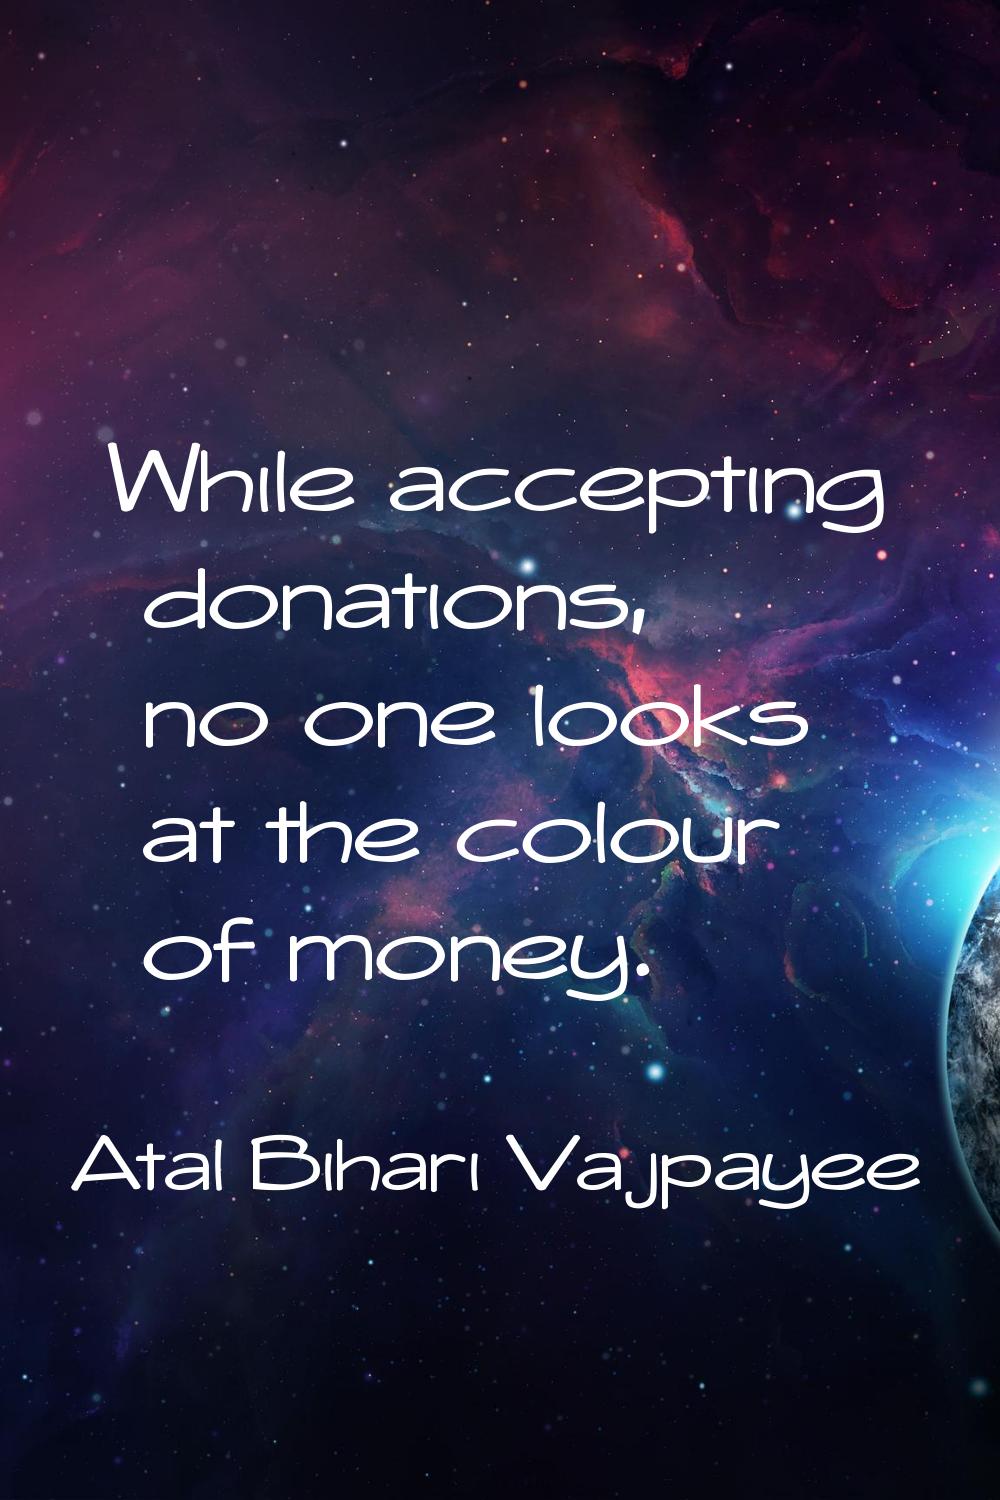 While accepting donations, no one looks at the colour of money.